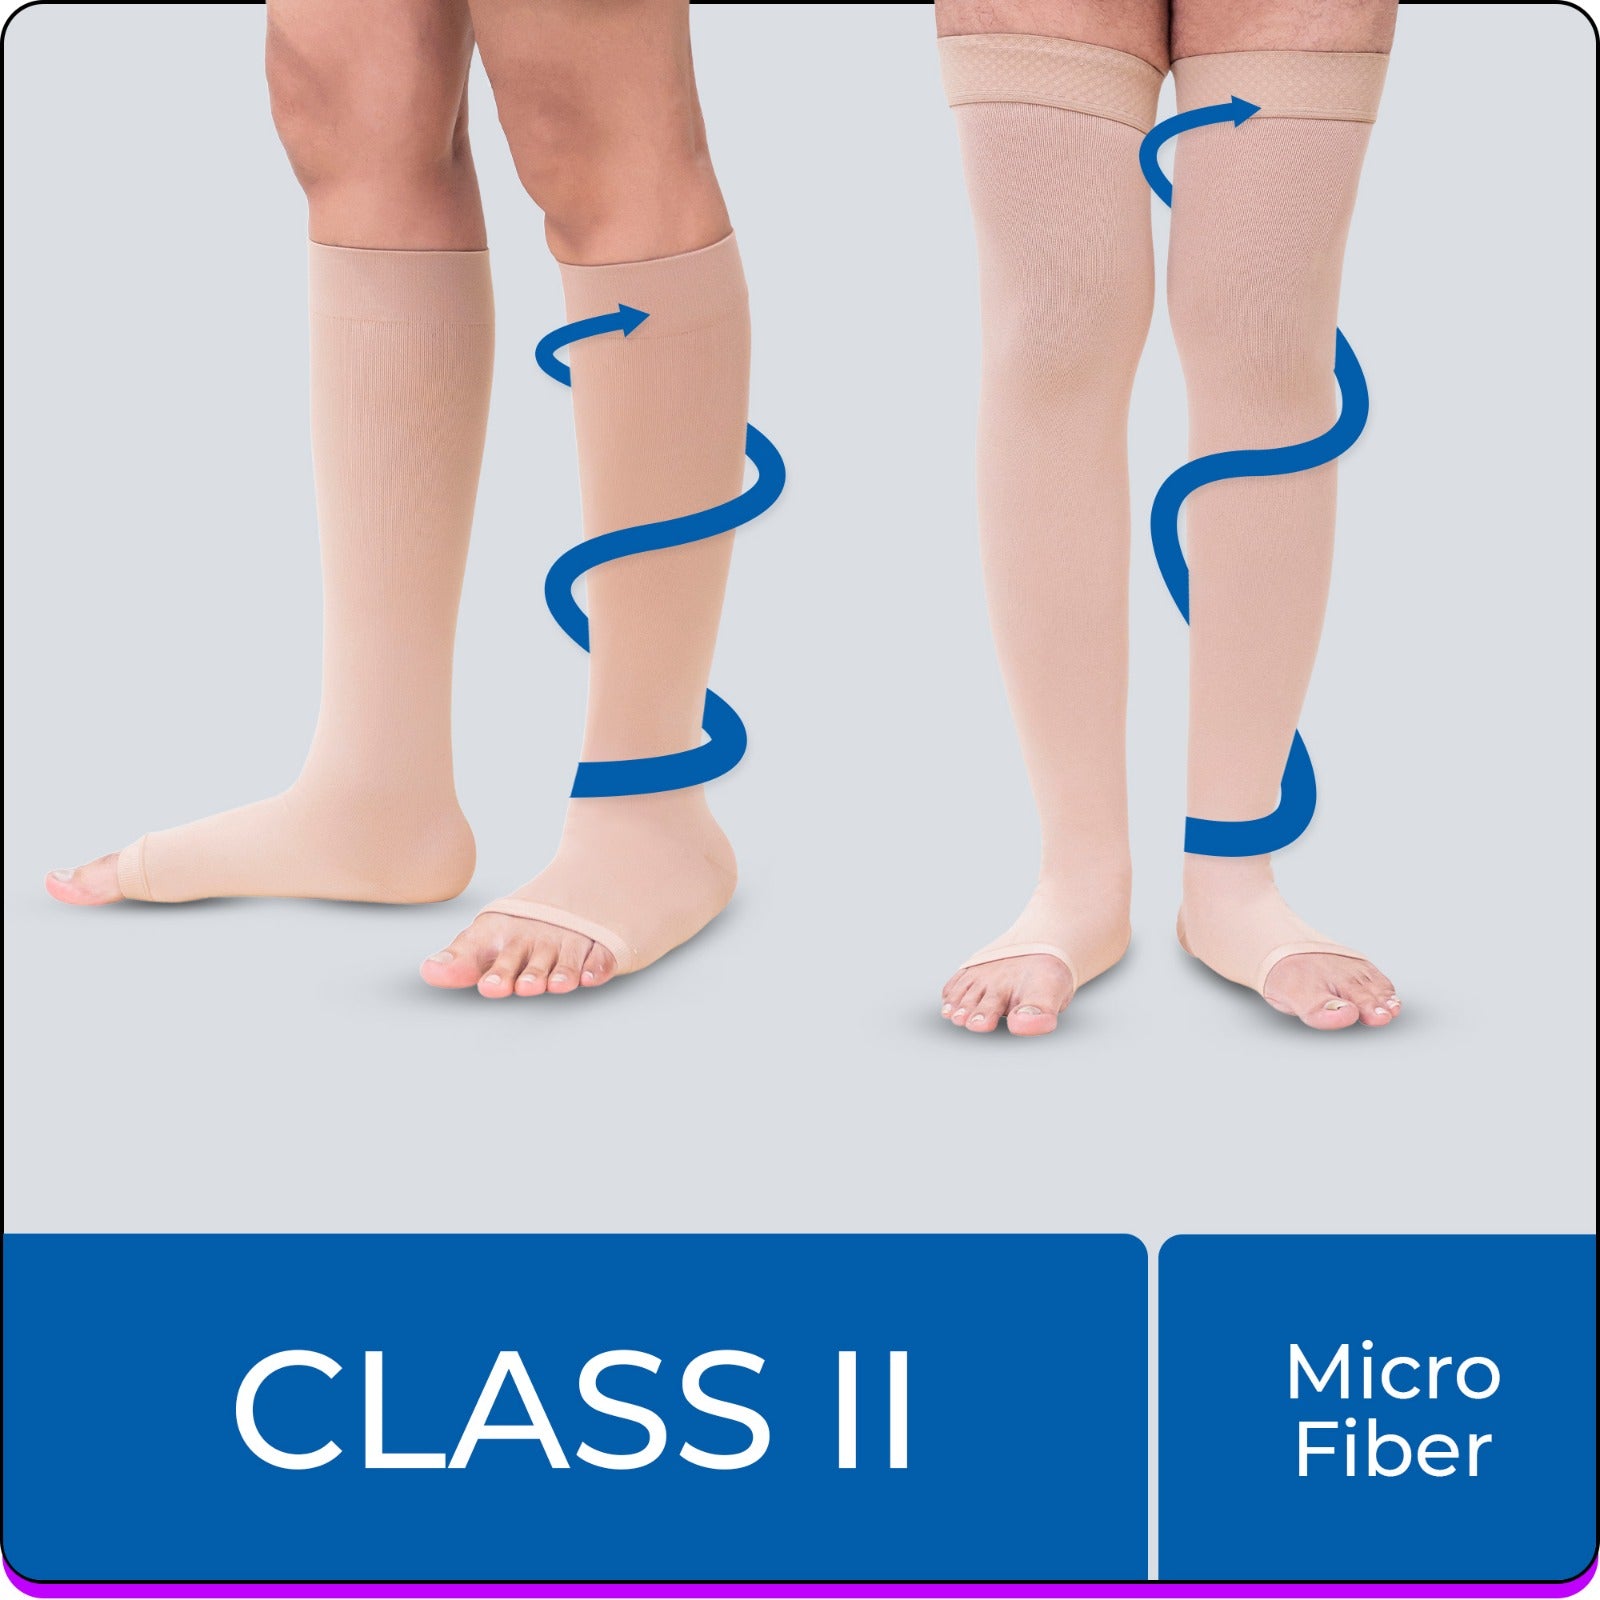 Sorgen Royale Class 2 Stockings for Vericose Veins –